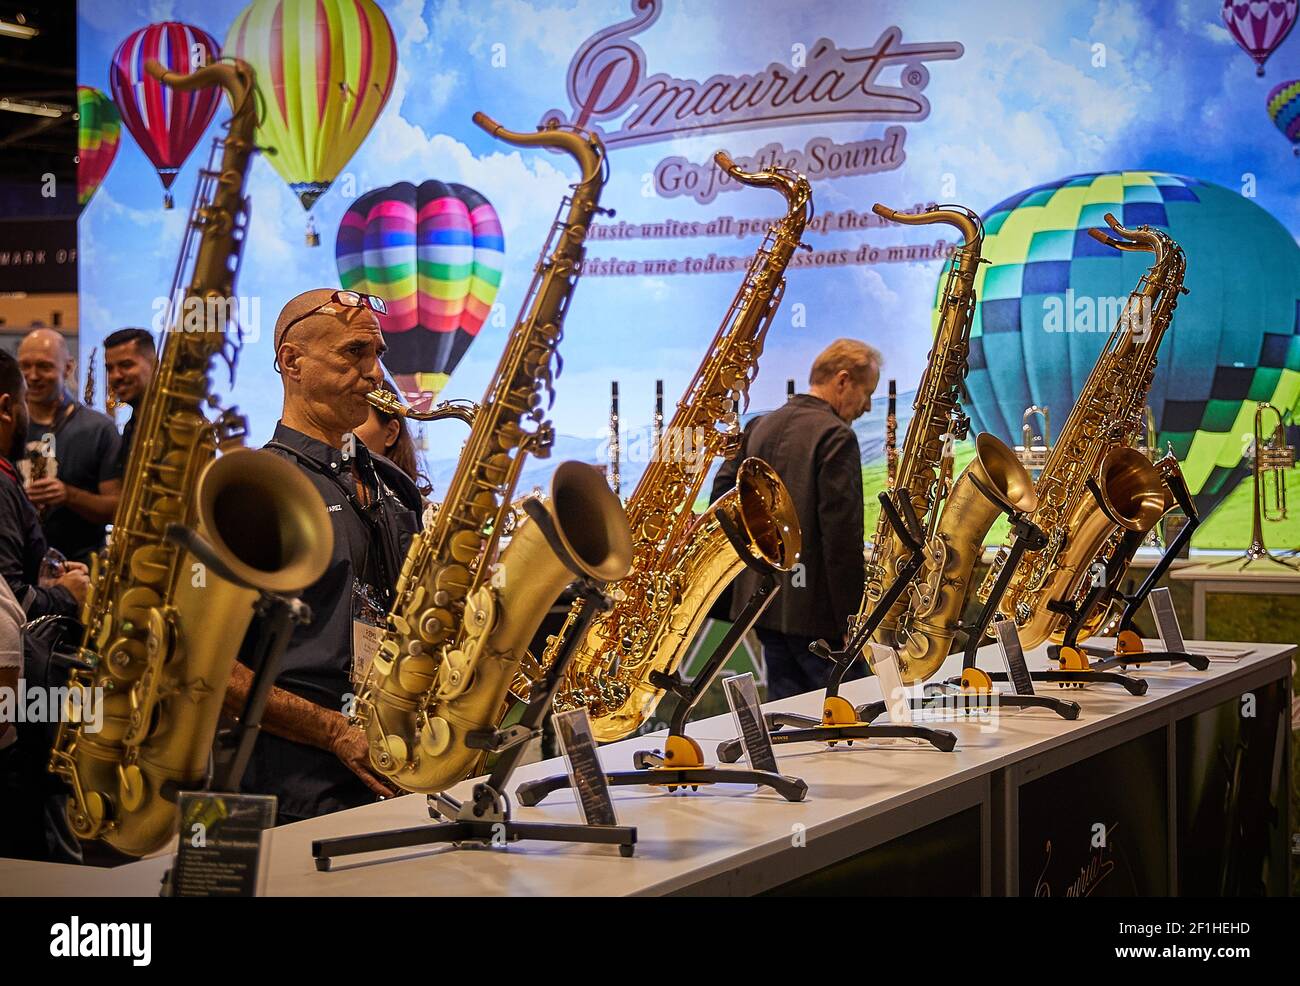 Man Playing saxophone at Musical Instrument Convention Stock Photo